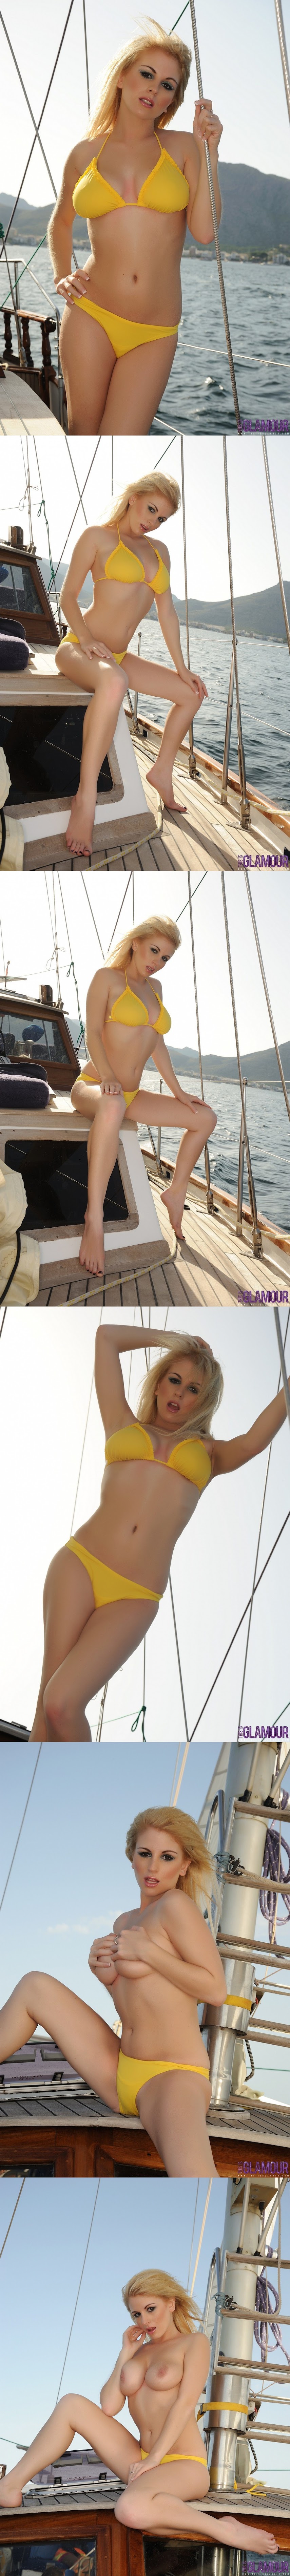 Zoe Stollery Sets Sail In A Canary Yellow Bikini thisisglamour 10280 